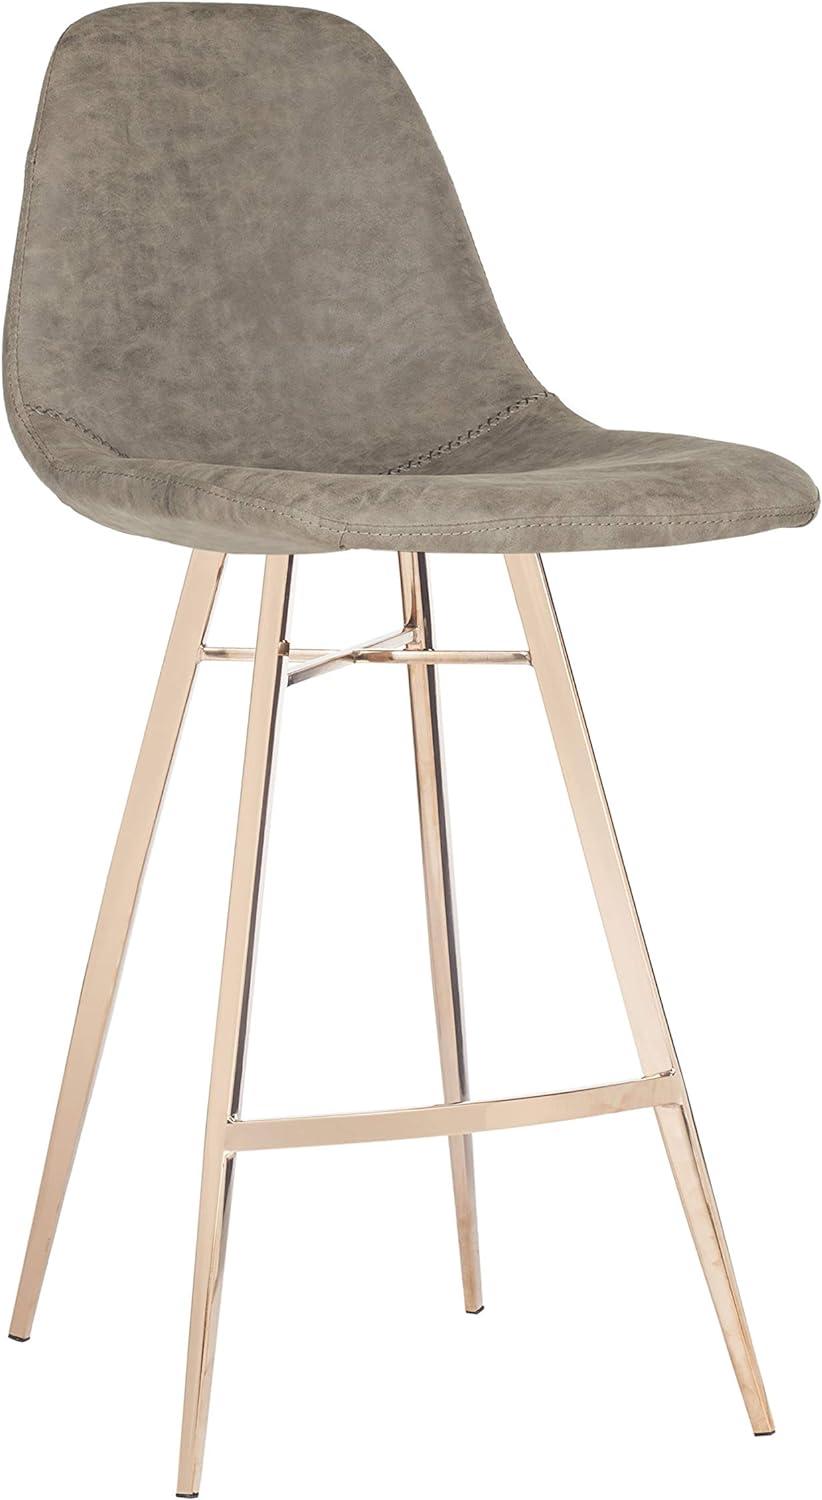 Transitional Taupe Faux Leather Counter Stool with Copper Finish